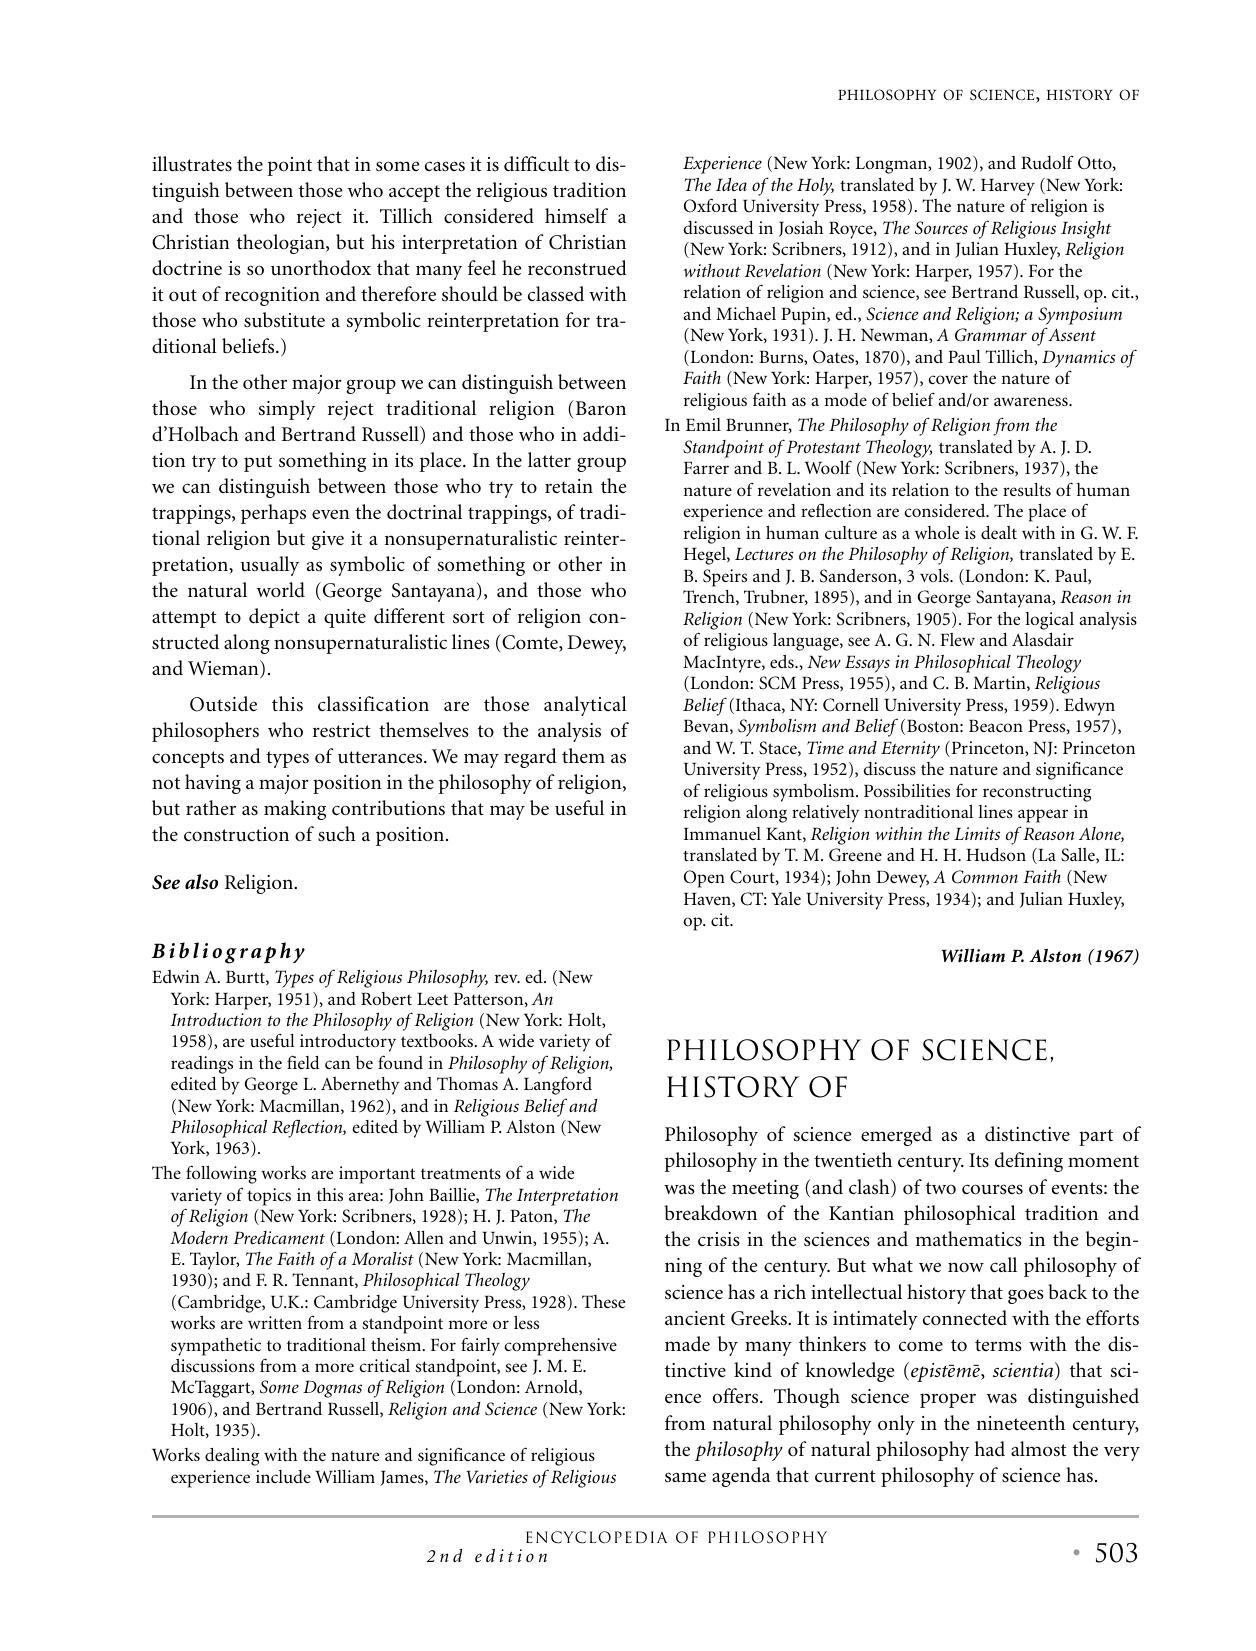 Philosophy of Science, History of (Encyclopedia of Philosophy vol. 7) - Chapter